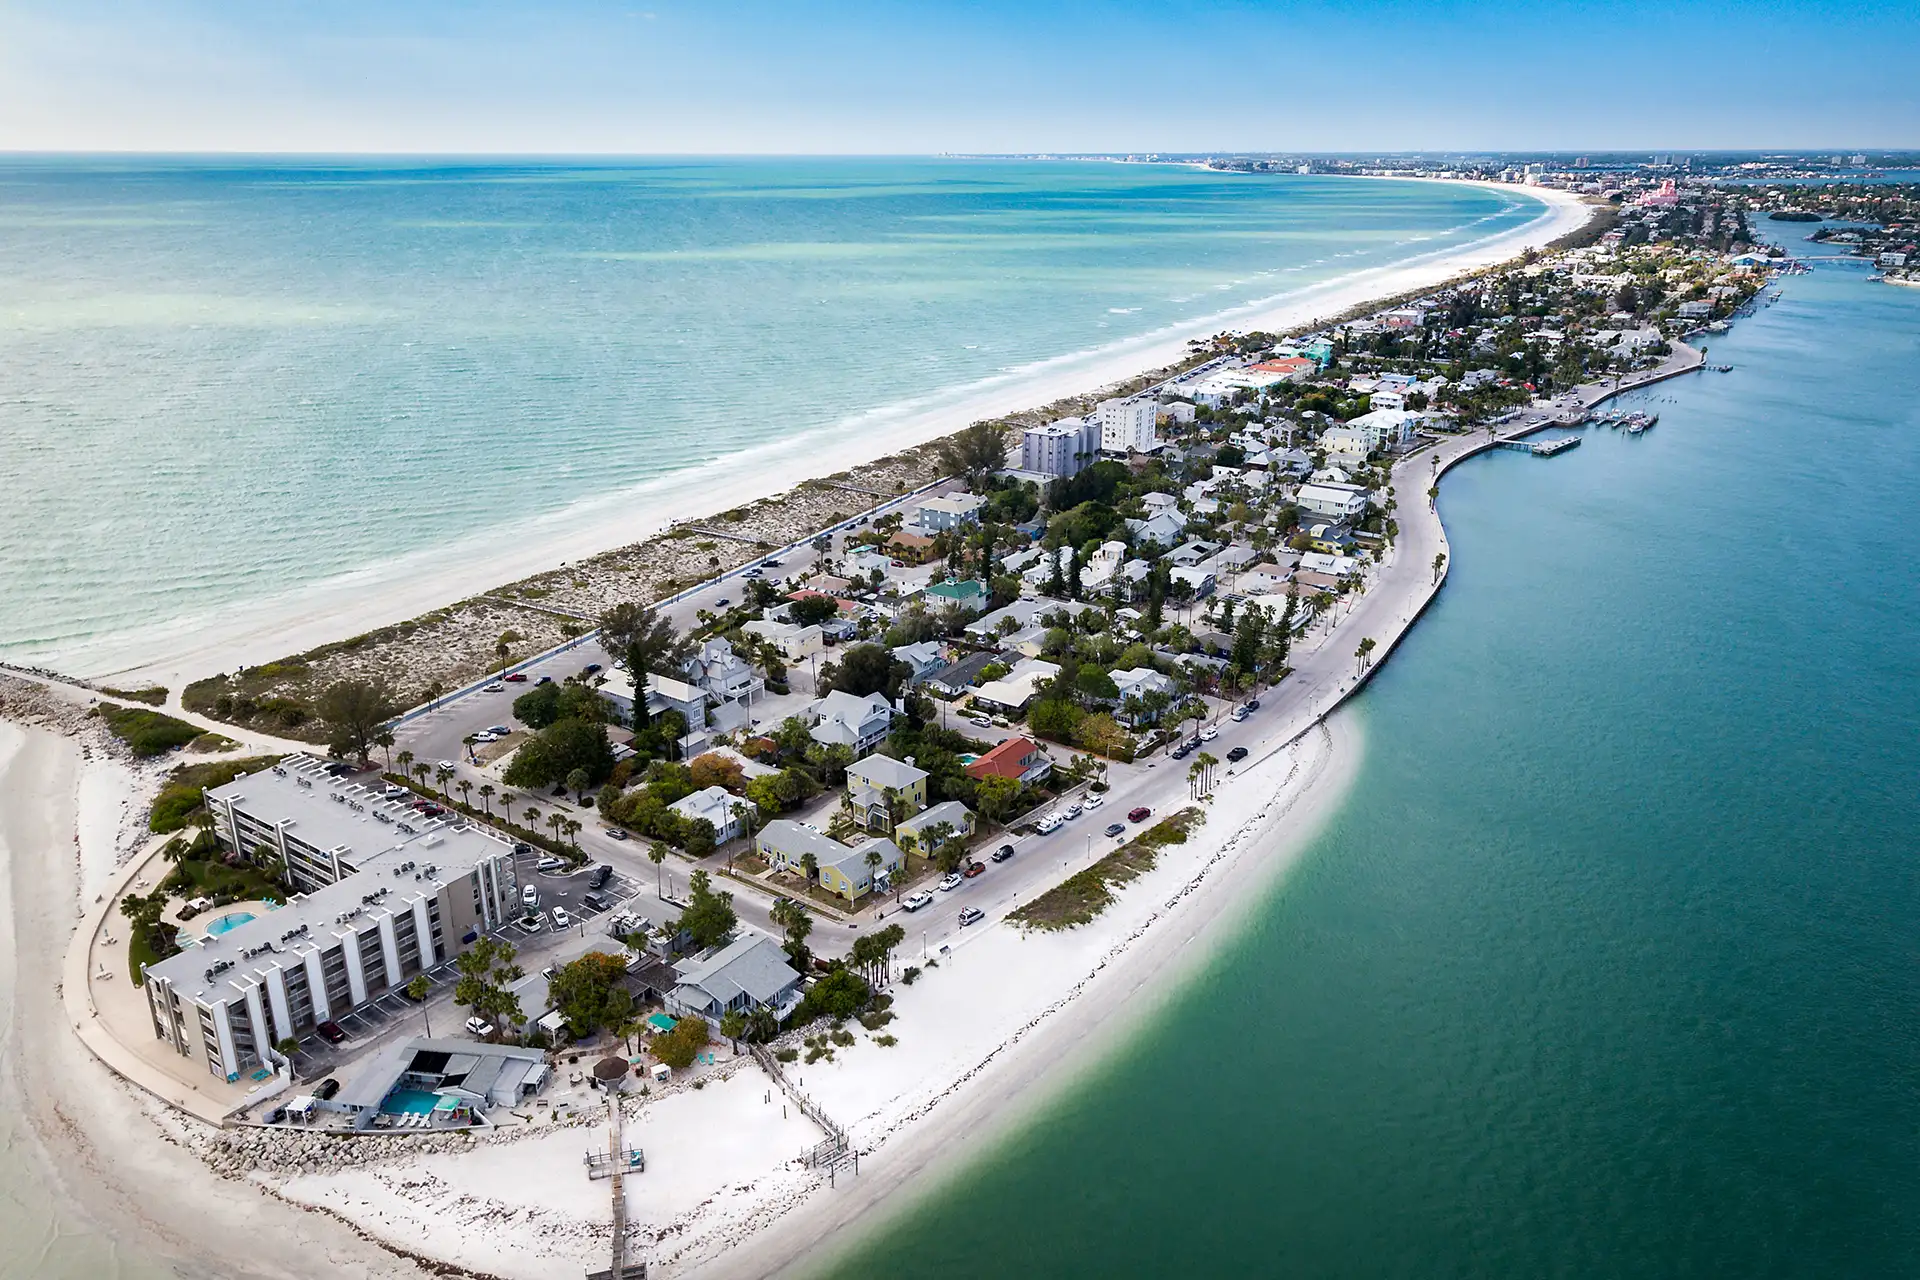 Aerial View of Pass-a-Grille, Florida; Courtesy of Kevin J King/Shutterstock.com